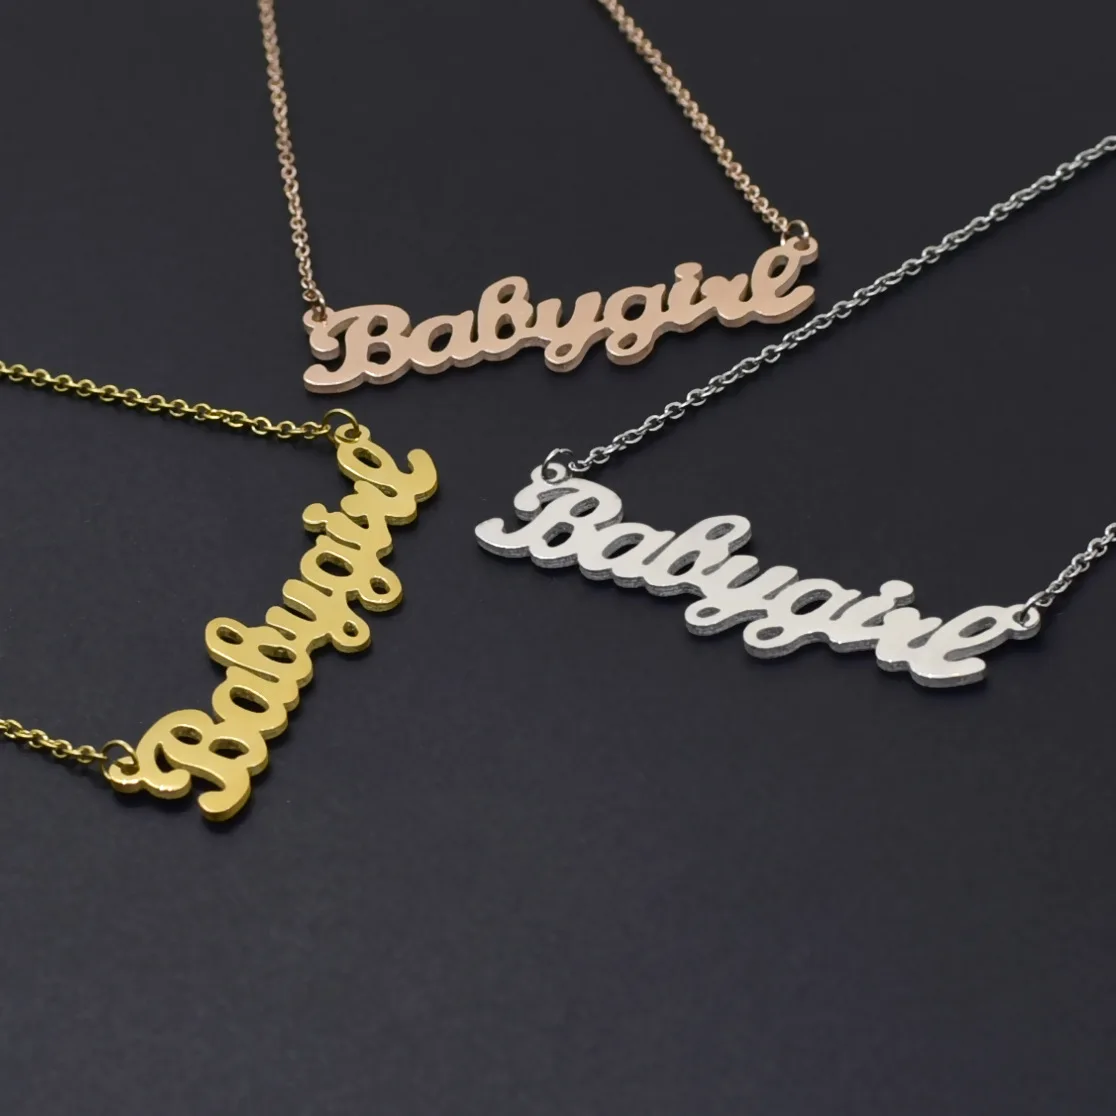 

2020 titanium steel letter necklace vintage English Babygirl pendant necklace (KSS259), Same as the picture